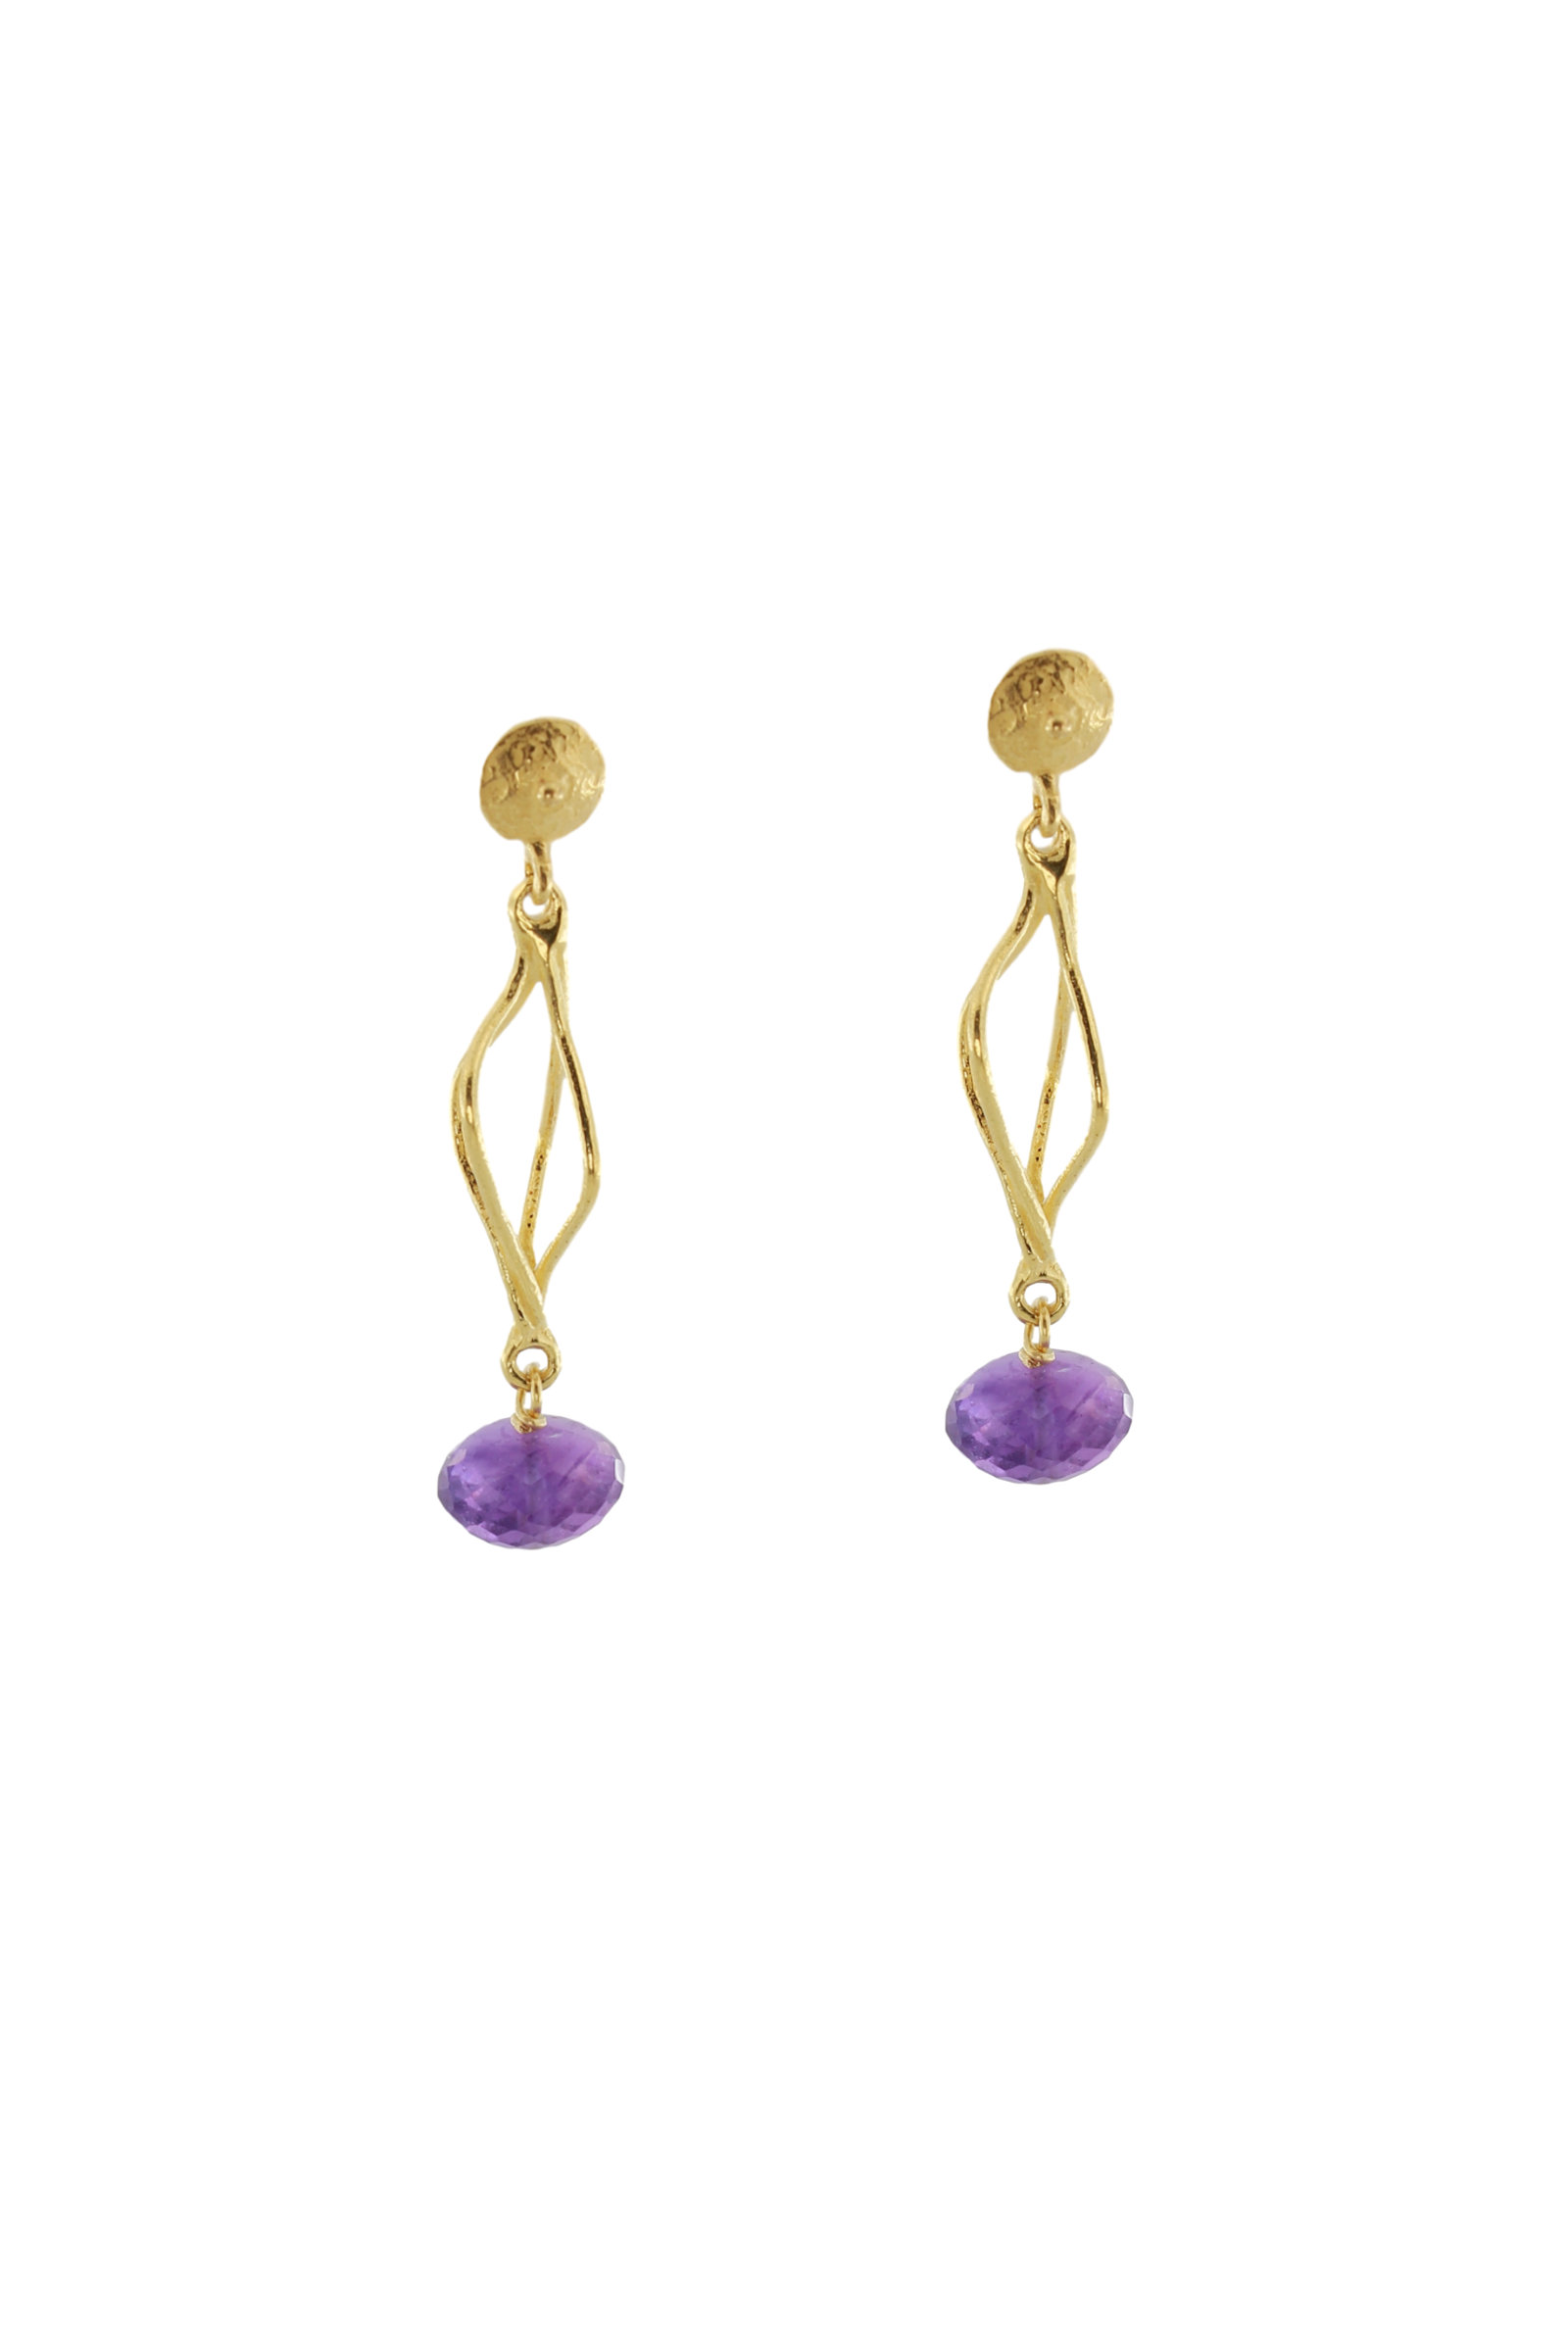 SD344D-18-Kt-Yellow-Gold-Pendant-Earrings-with-Purple-Amethyst-1